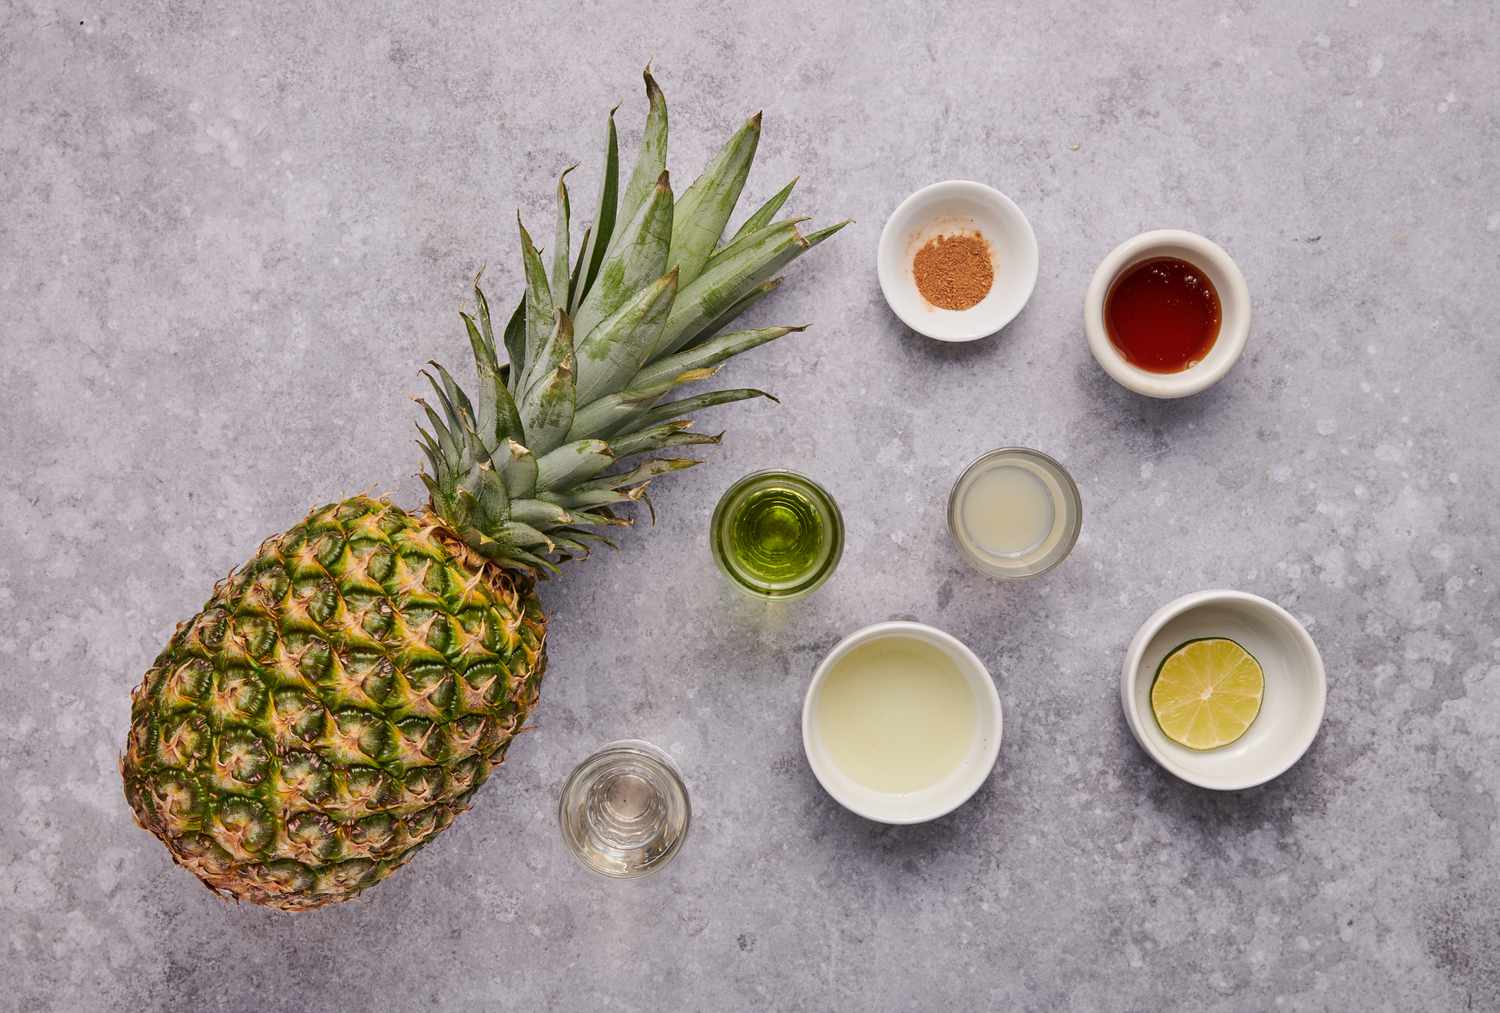 Ingredients to make a grilled pineapple chartreuse swizzle cocktail